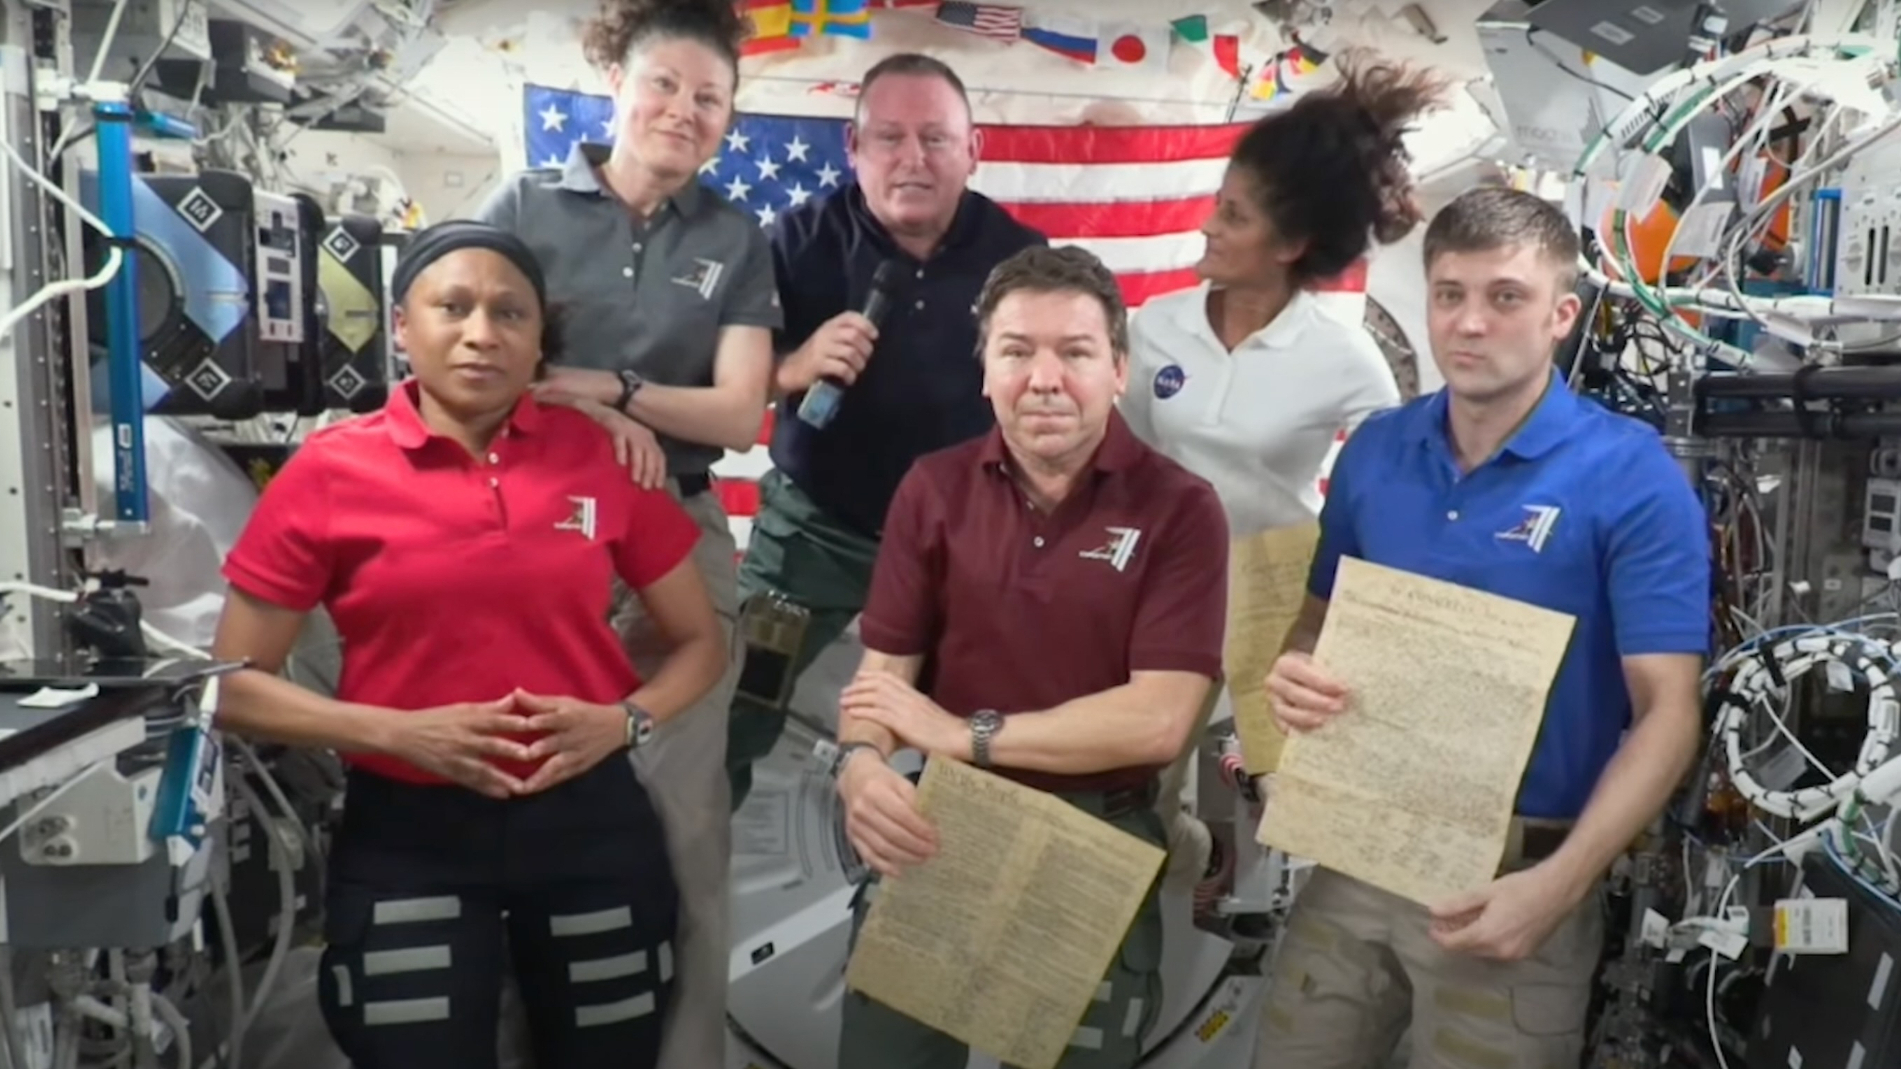 Four men and two women float aboard the International Space Station, with an American flag in the background